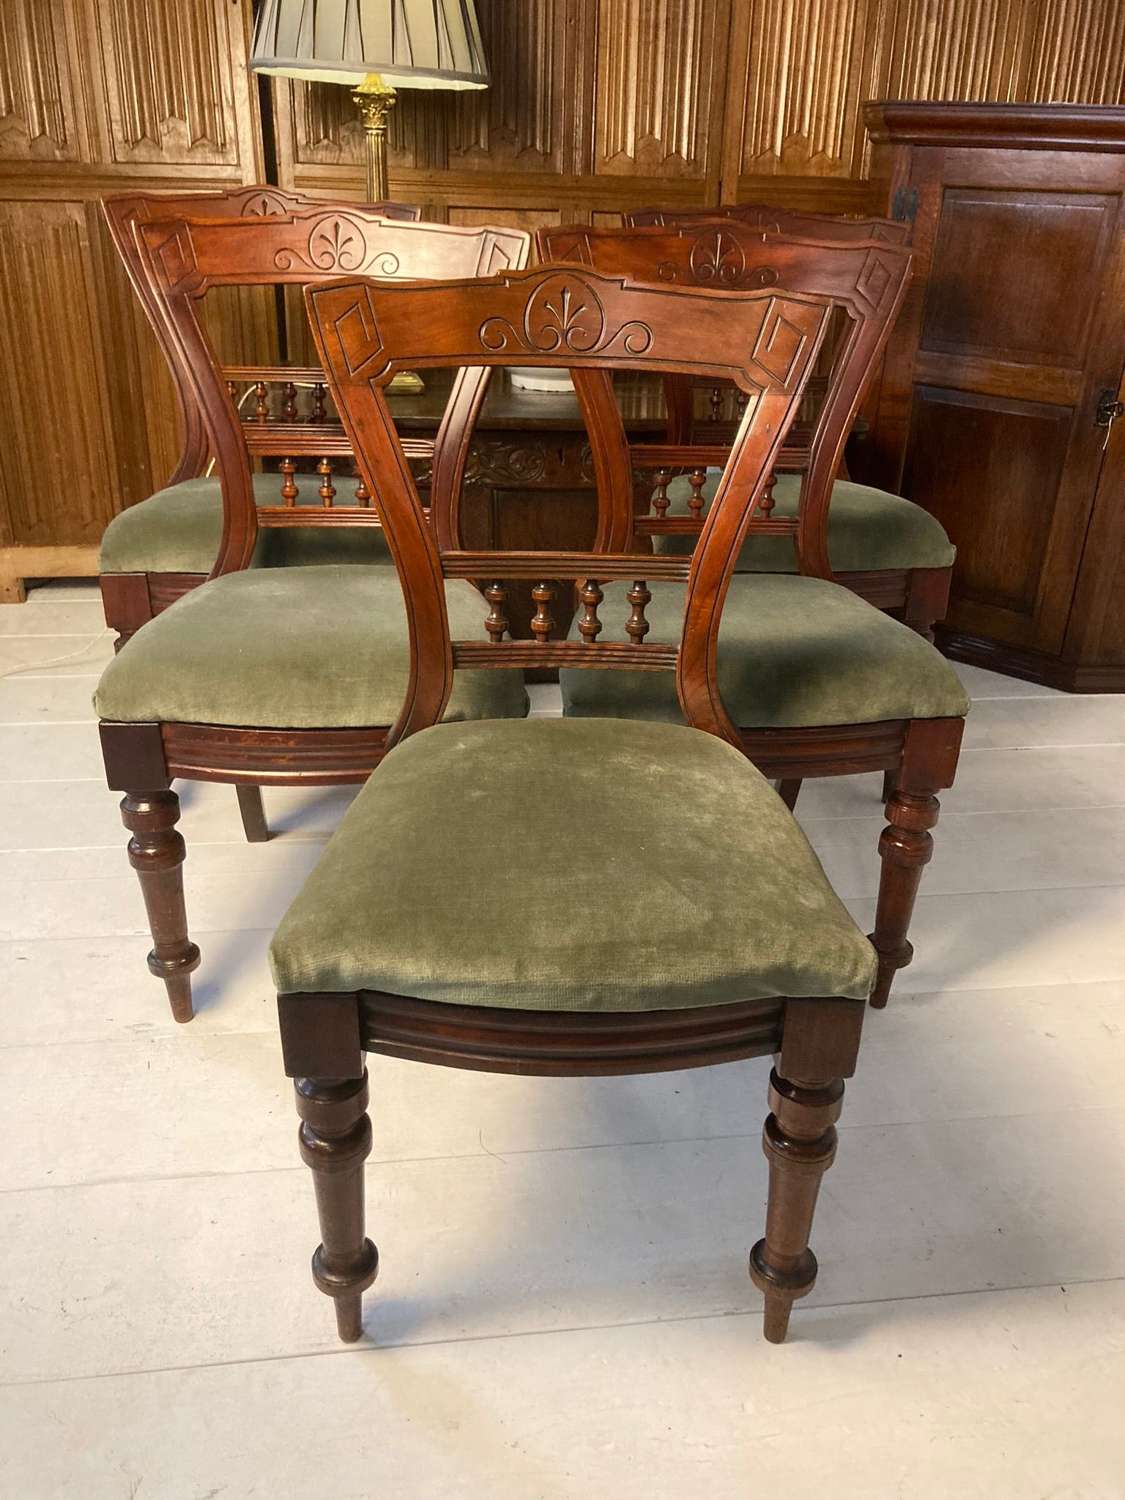 Victorian dining chairs